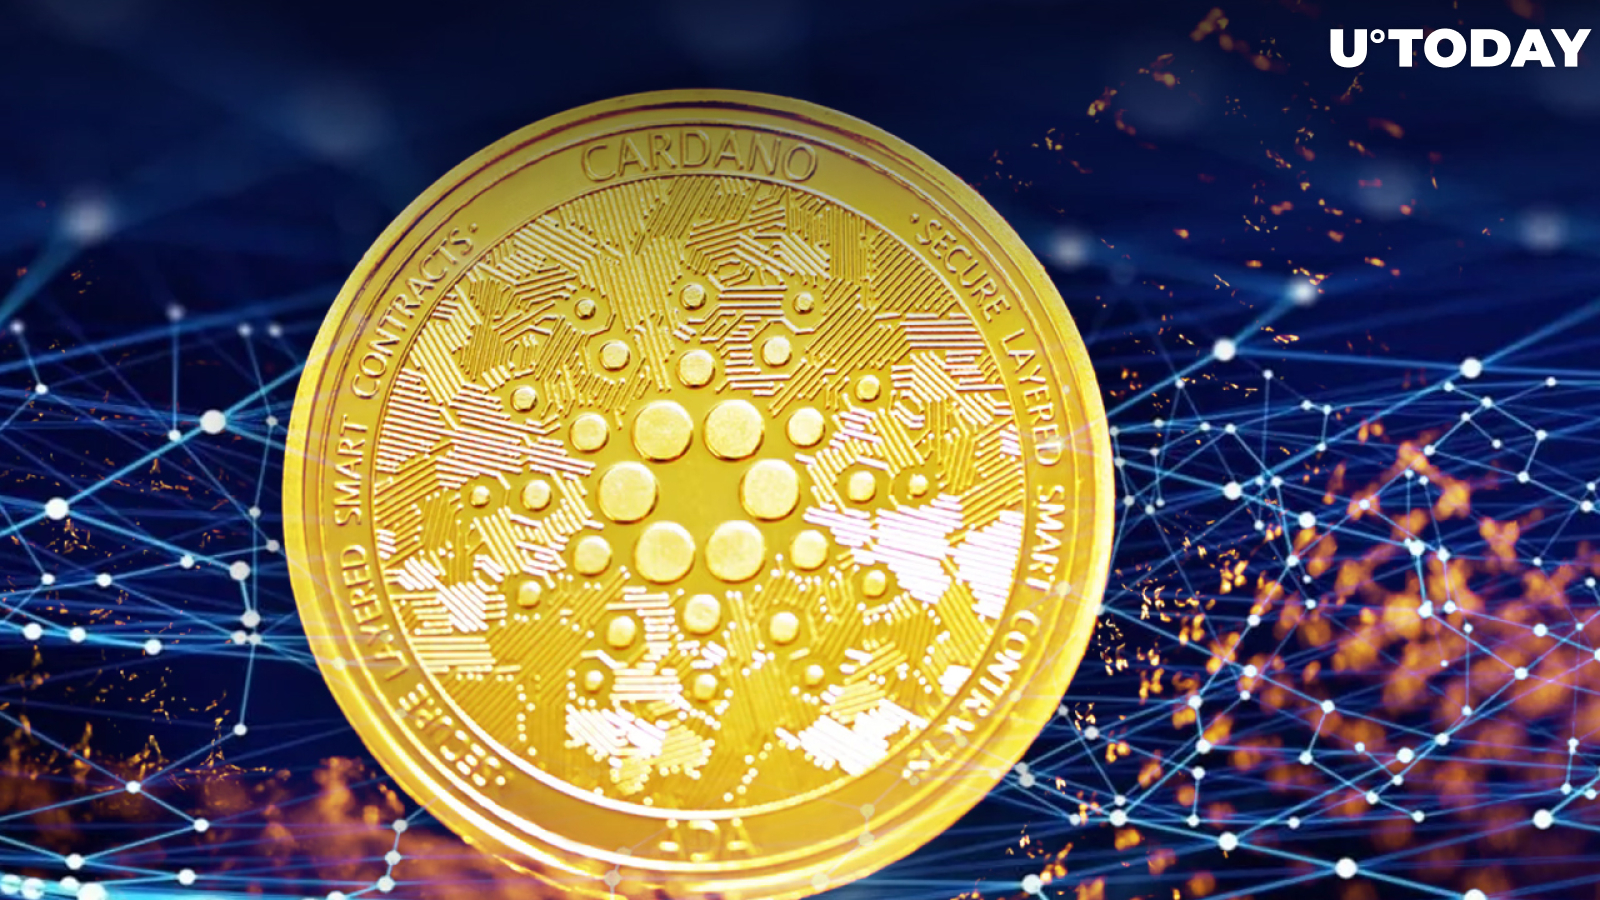 Cardano Network Keeps Expanding with Djed to Be Listed on Blockchain's First Hybrid DEX